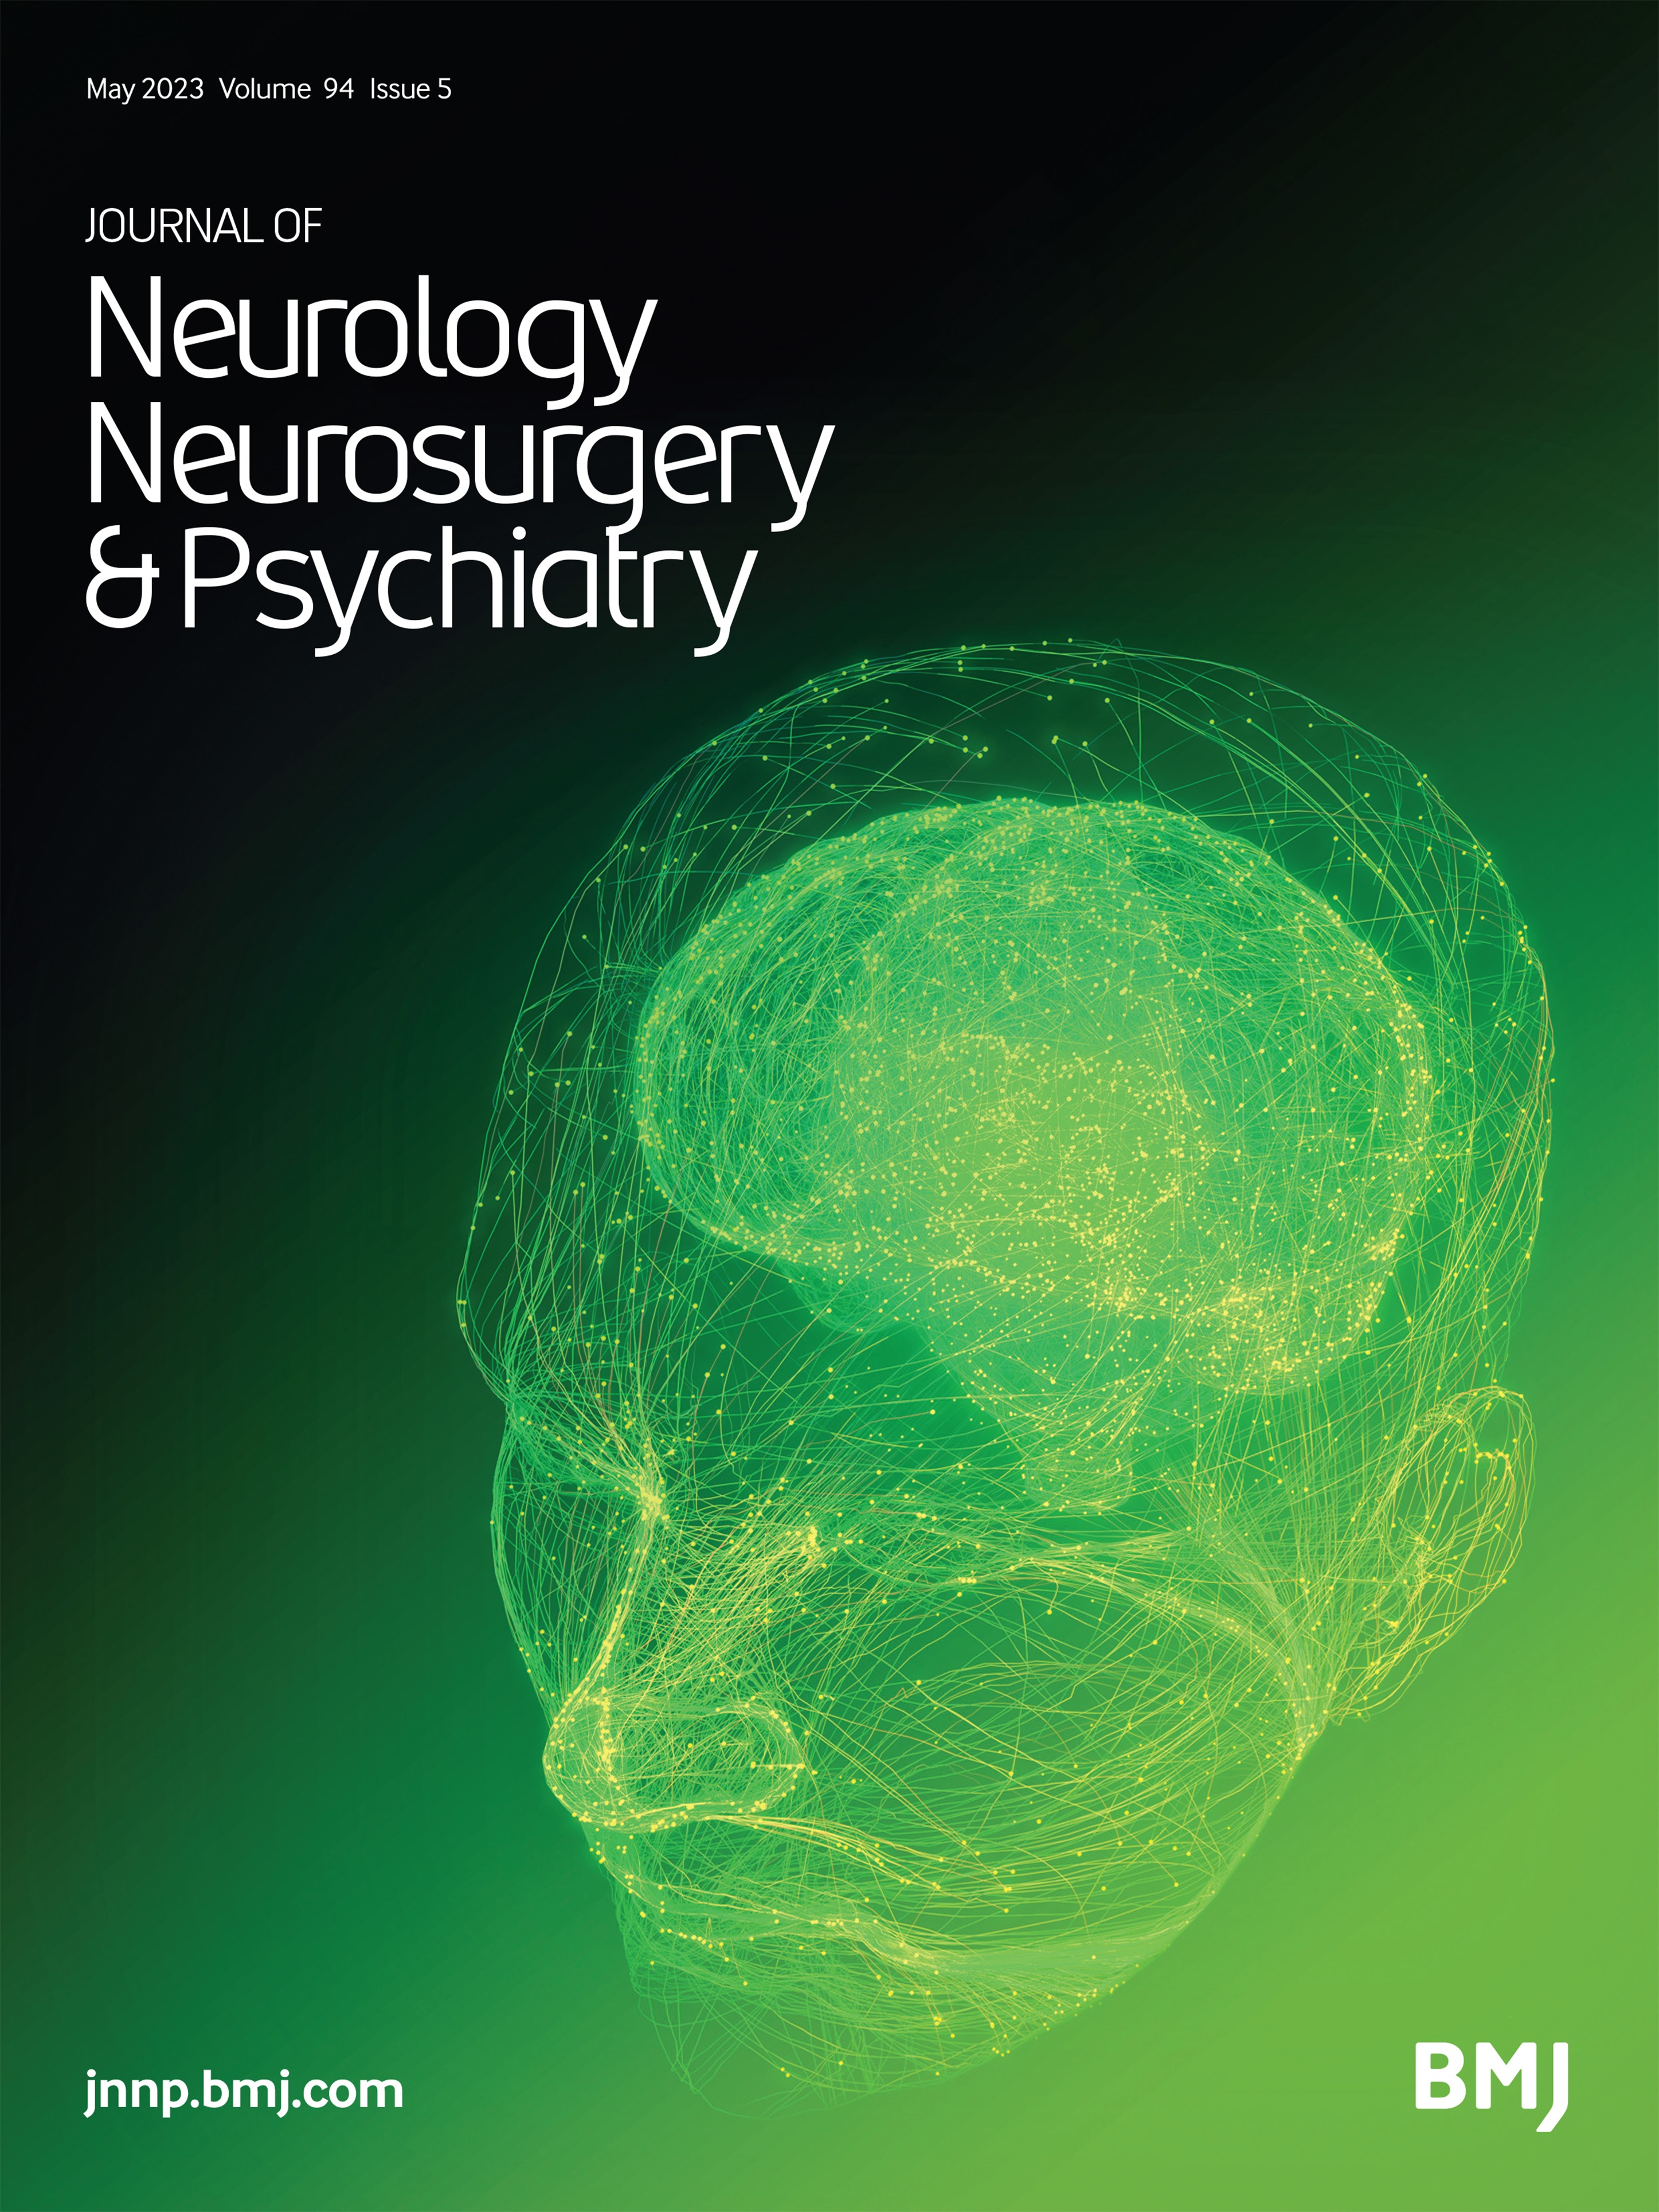 Adult-onset epilepsy and risk of traumatic brain injury: a nationwide cohort study